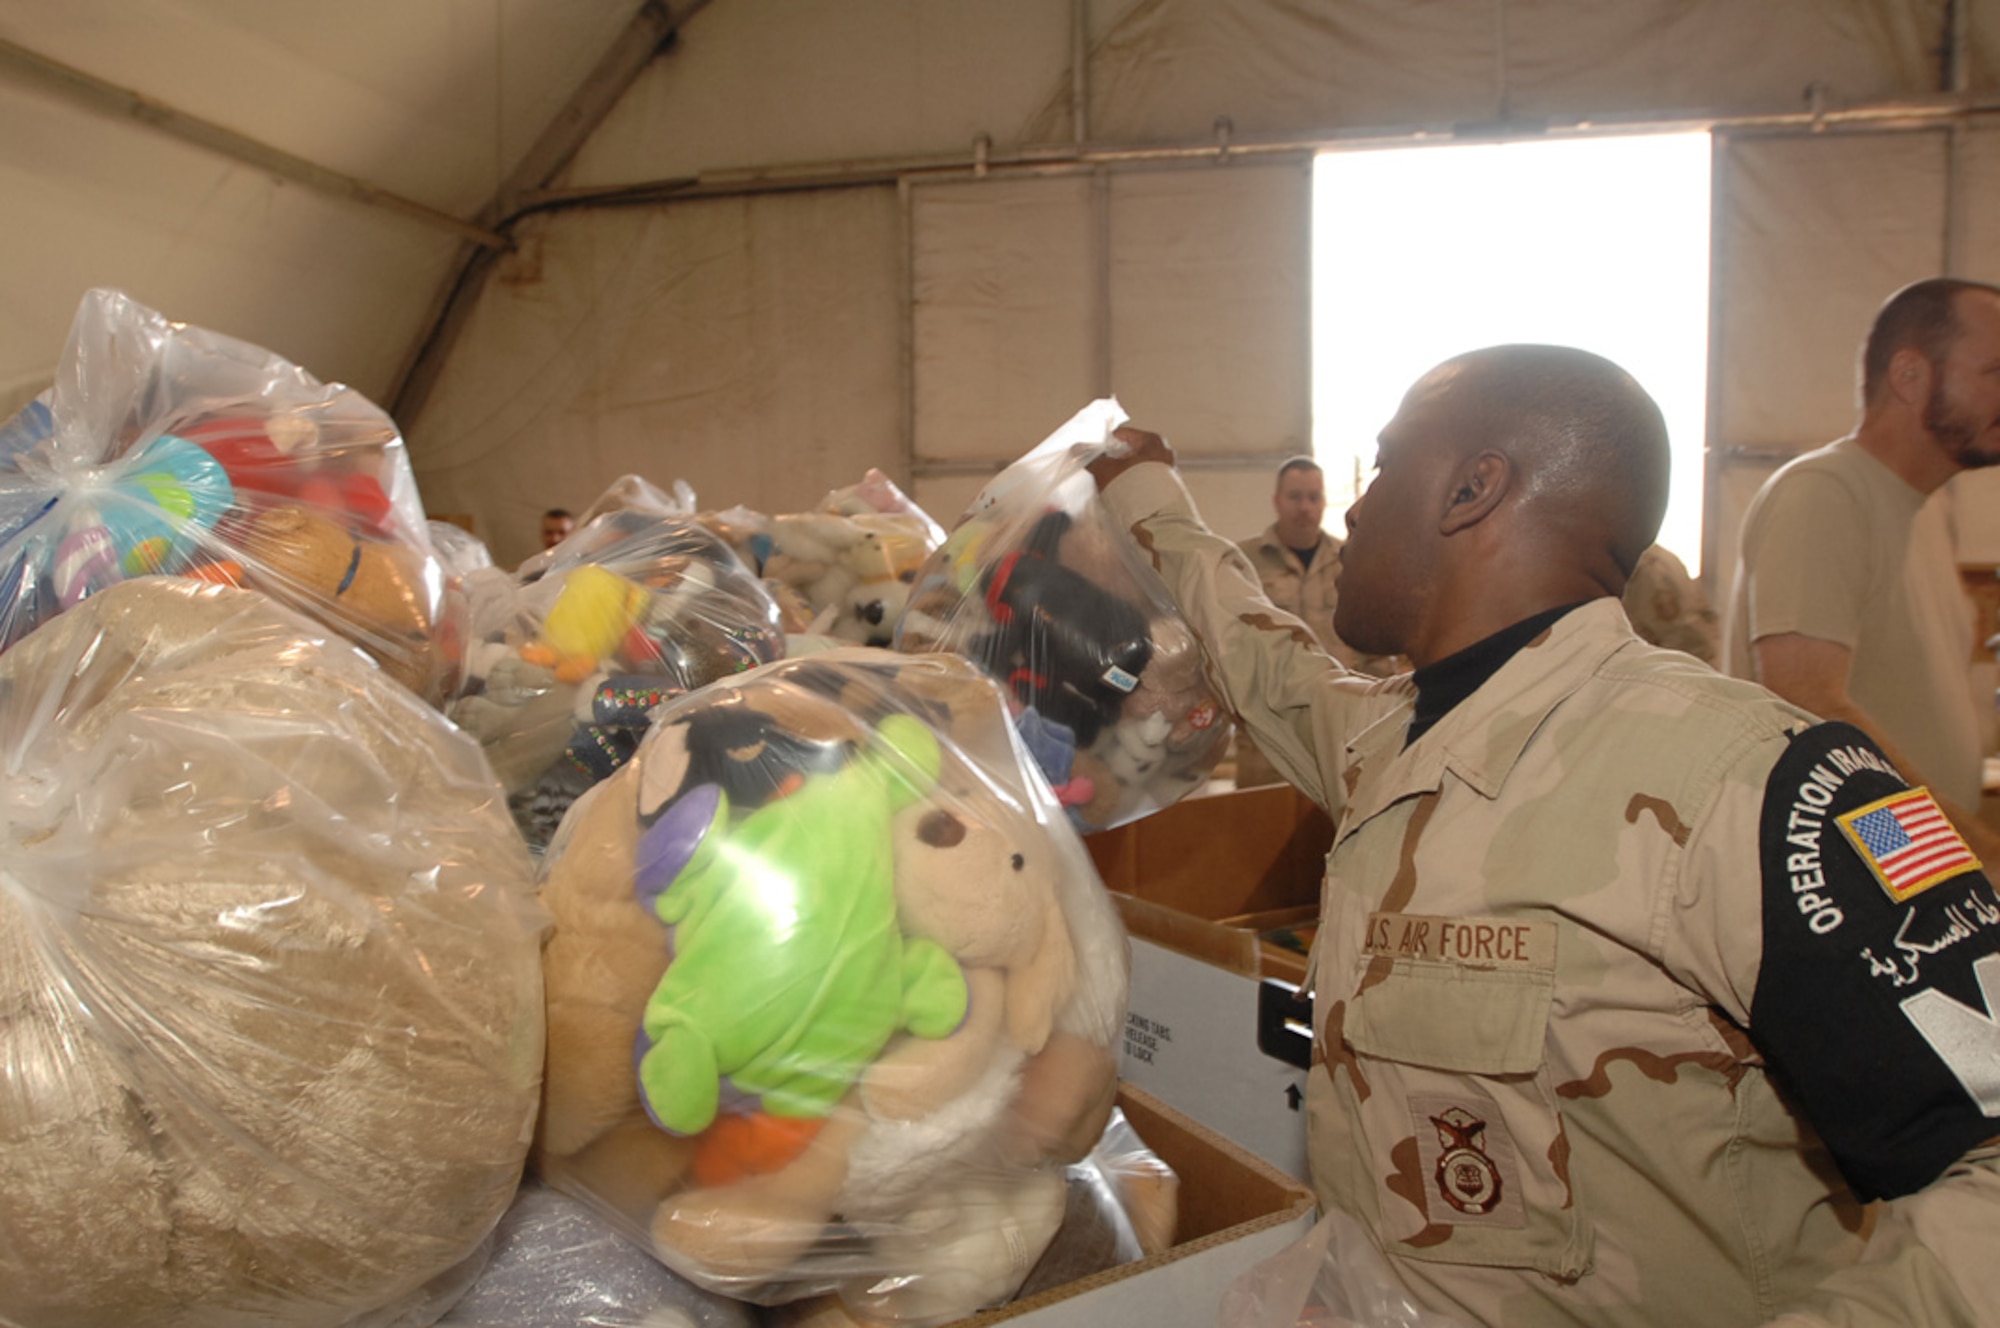 ALI AIR BASE, Iraq -- Tech. Sgt. Paul Wright tosses a bag of toys into the third crate filled with even more toys Dec. 22 in support of Operation Iraqi Child led by the Focus 5/6 and Top 3 councils. In just over a month, Airmen on base collected thousands of school supply items, soccer balls, stuffed animals and toys from back home. Airmen from across all eight squadrons spent a few hours sorting all the donated items which the office of special investigations will give to Iraqi families in the An Nasiriyah area villages. Sergeant Wright is assigned to the 407th Expeditionary Provost Marshal Office and is deployed from Spangdahlem Air Base, Germany. (U.S. Air Force photo/Airman 1st Class Jonathan Snyder)